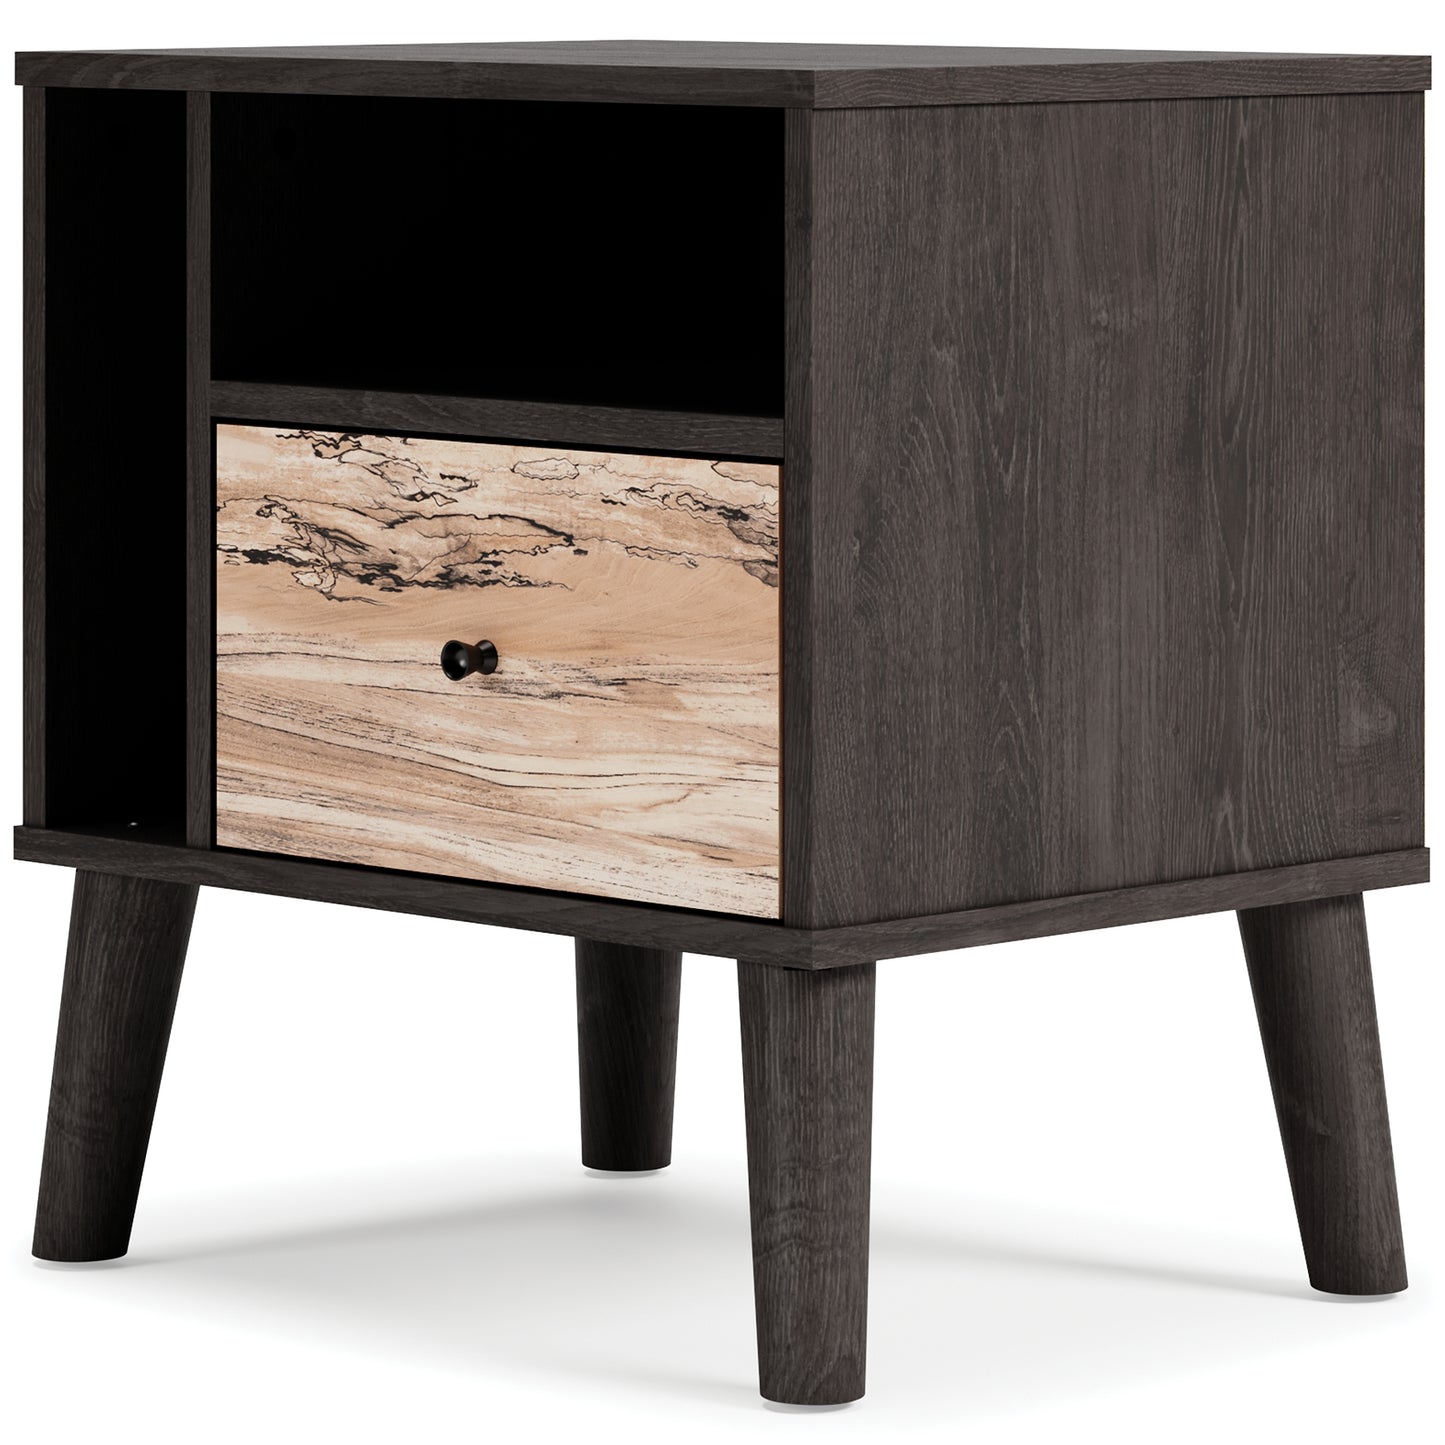 Piperton One Drawer Night Stand